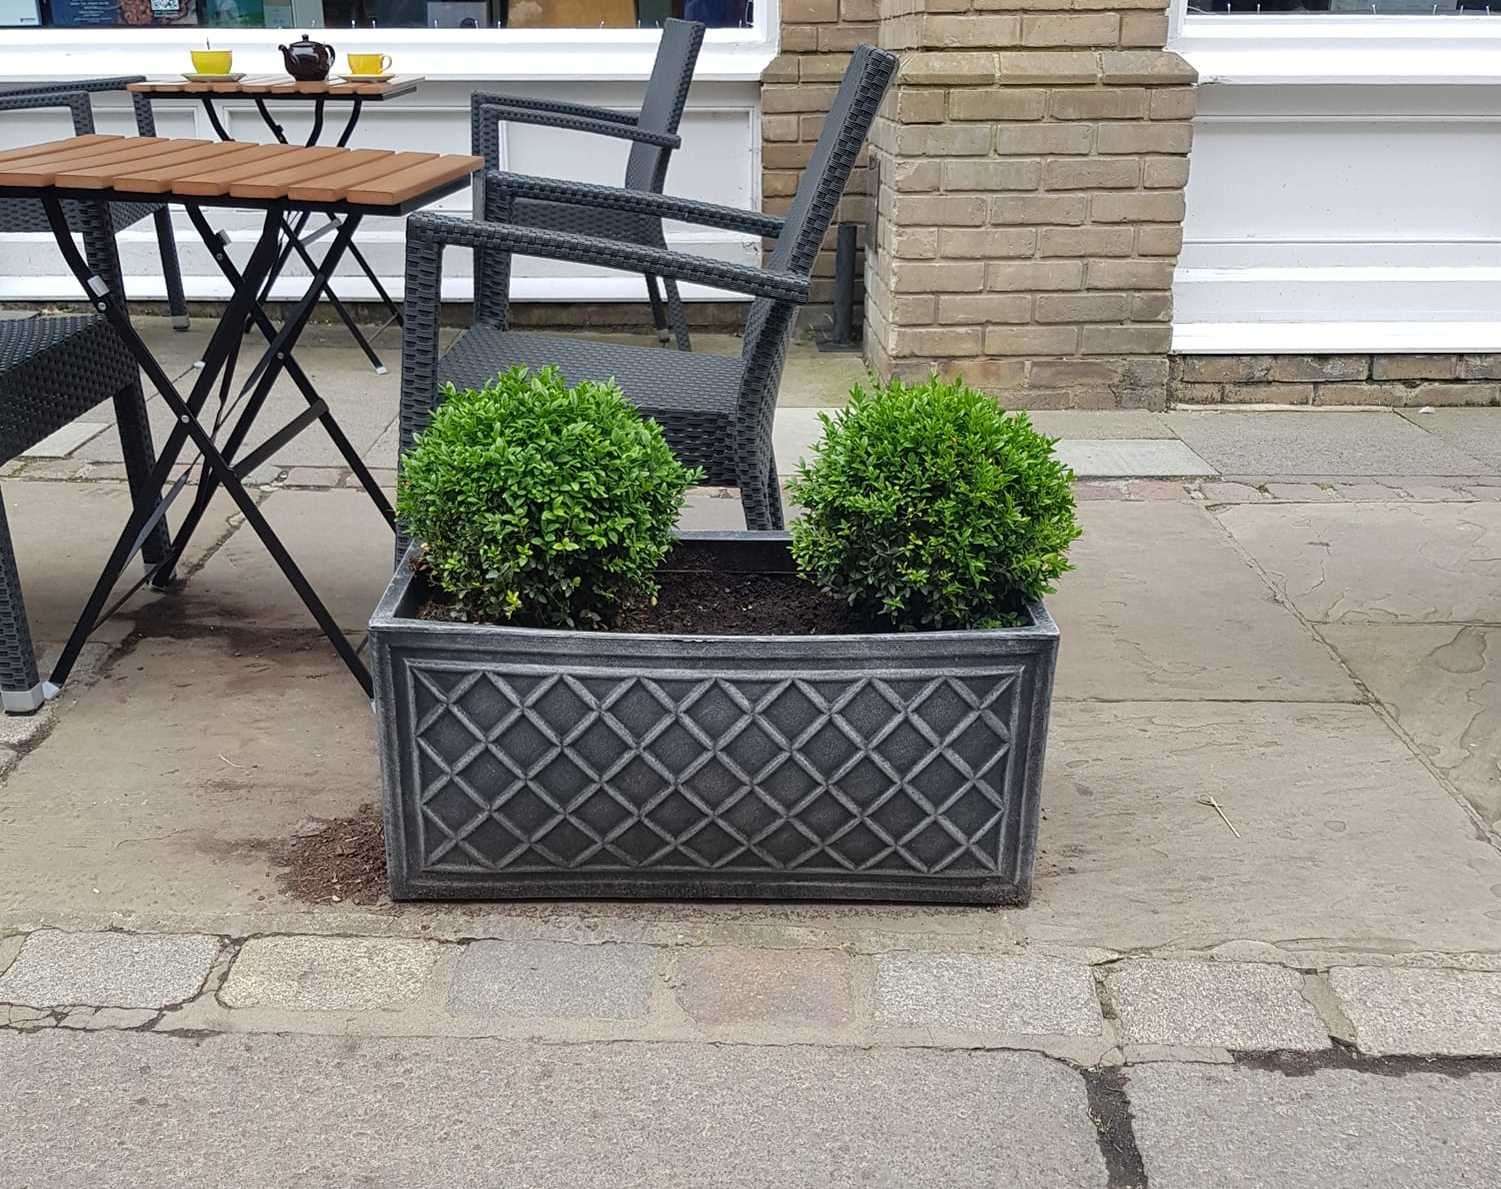 The planters have now been altered. Picture: Ann-Marie Bundock